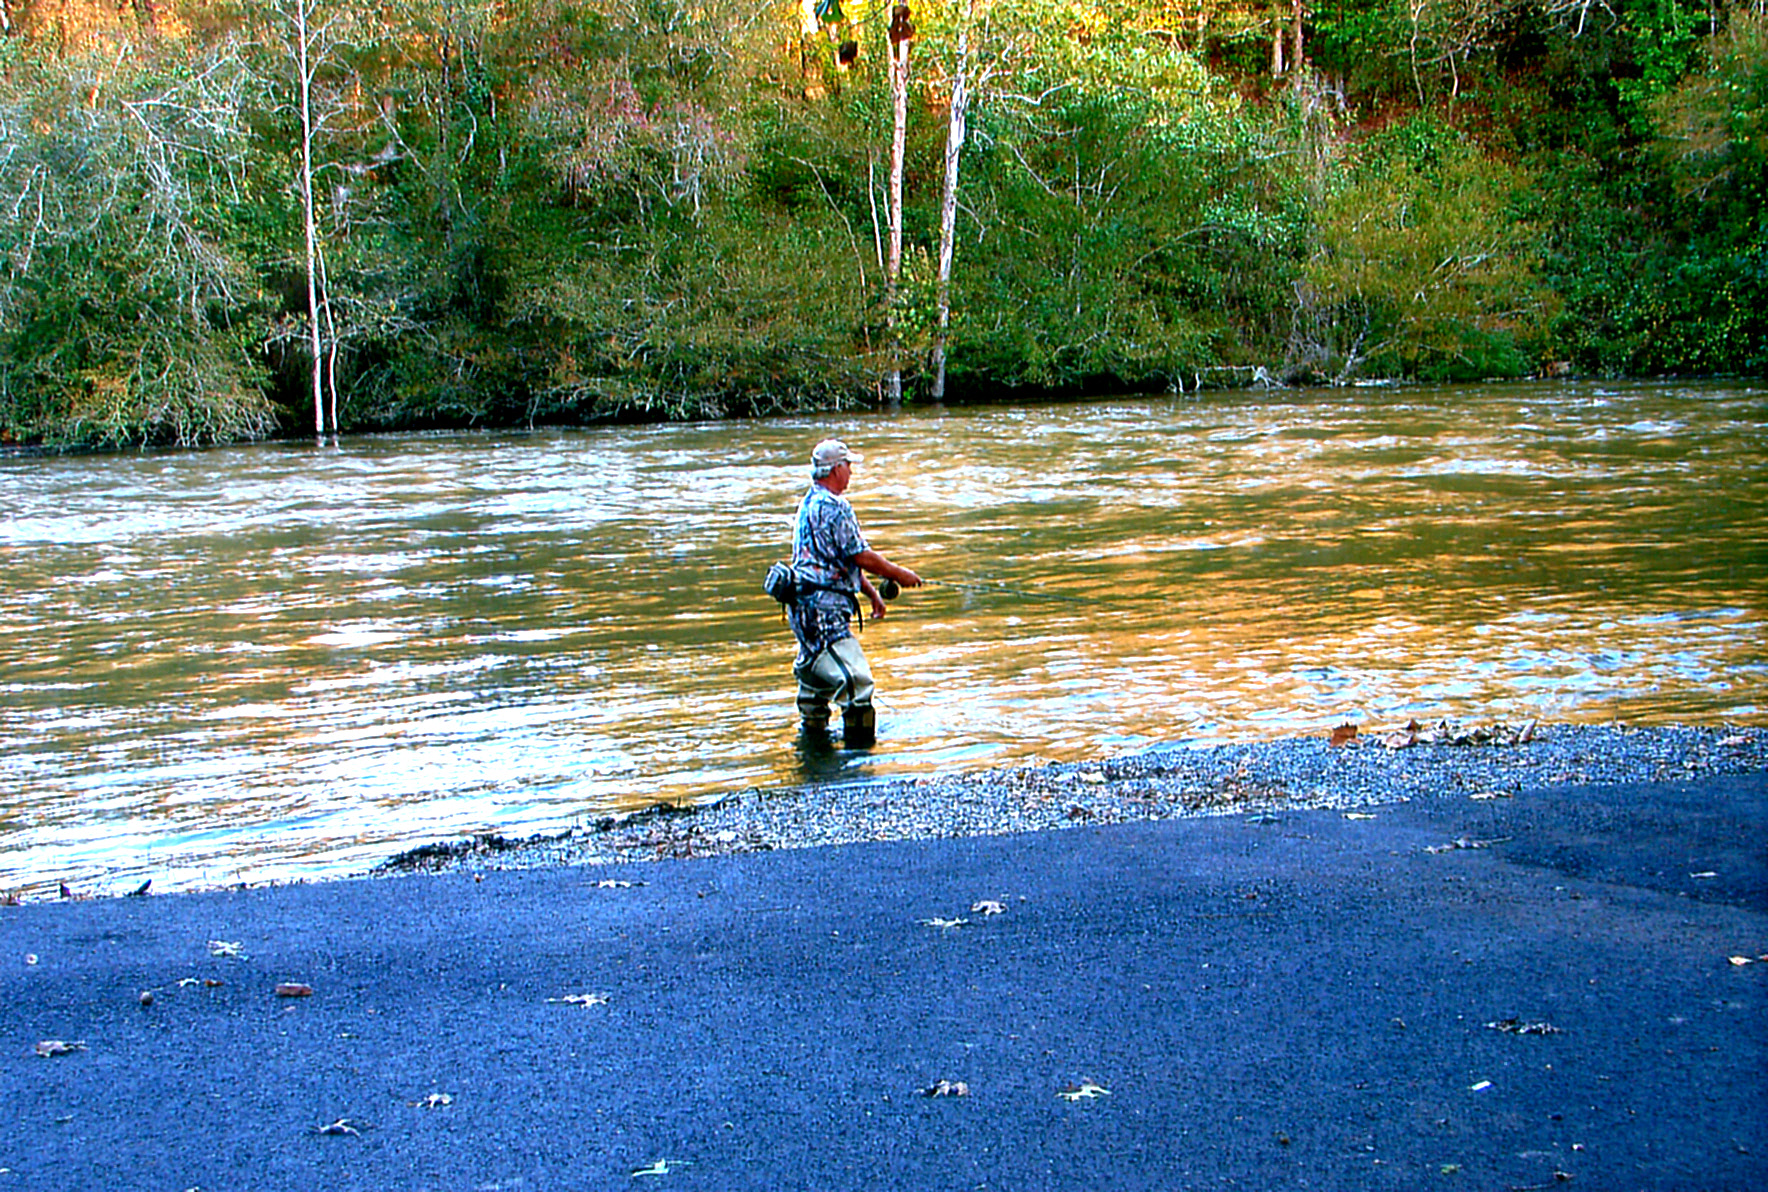 Fishing on the Cossatot River.